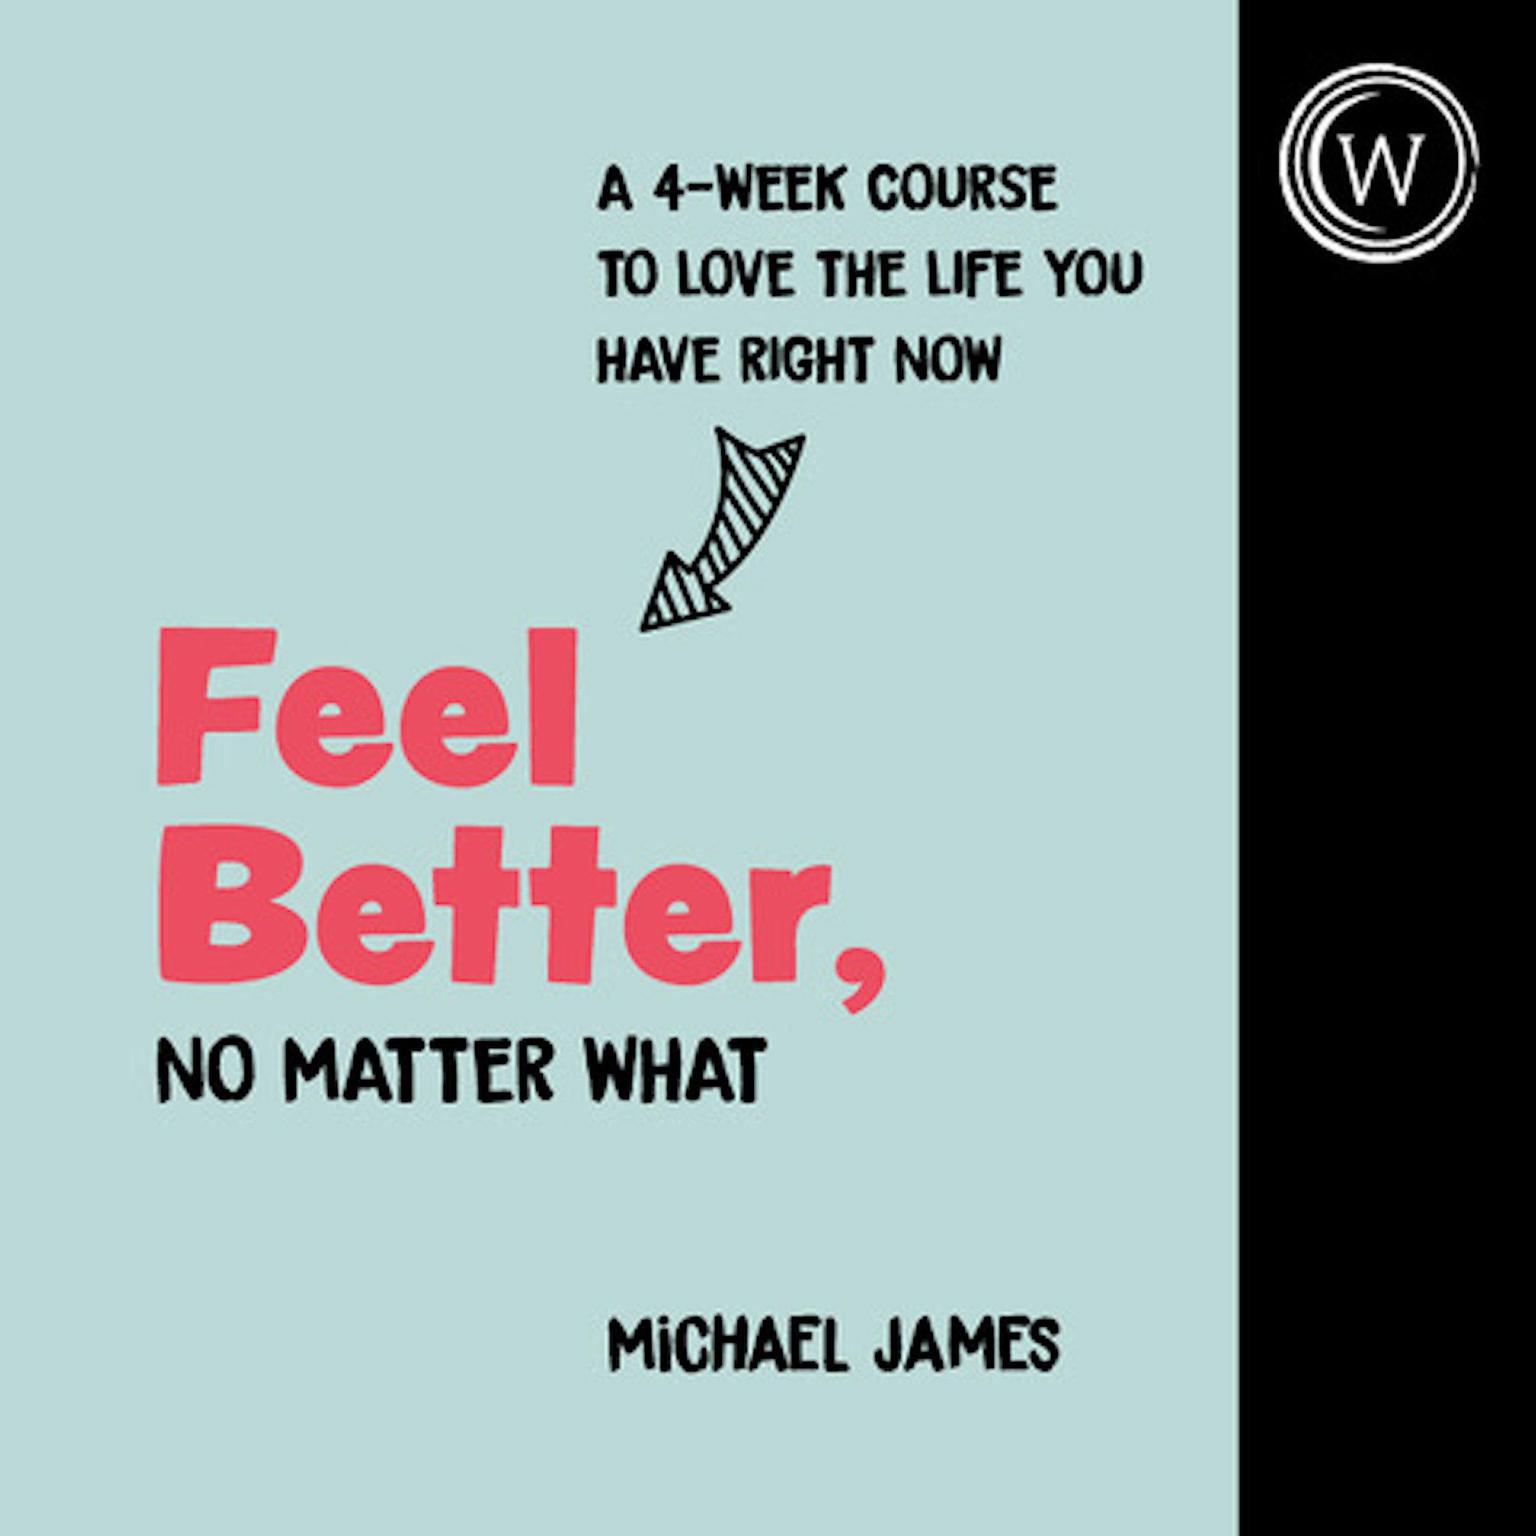 Feel Better, No Matter What: A 4-Week Course to Love the Life You Have Right Now Audiobook, by Michael James